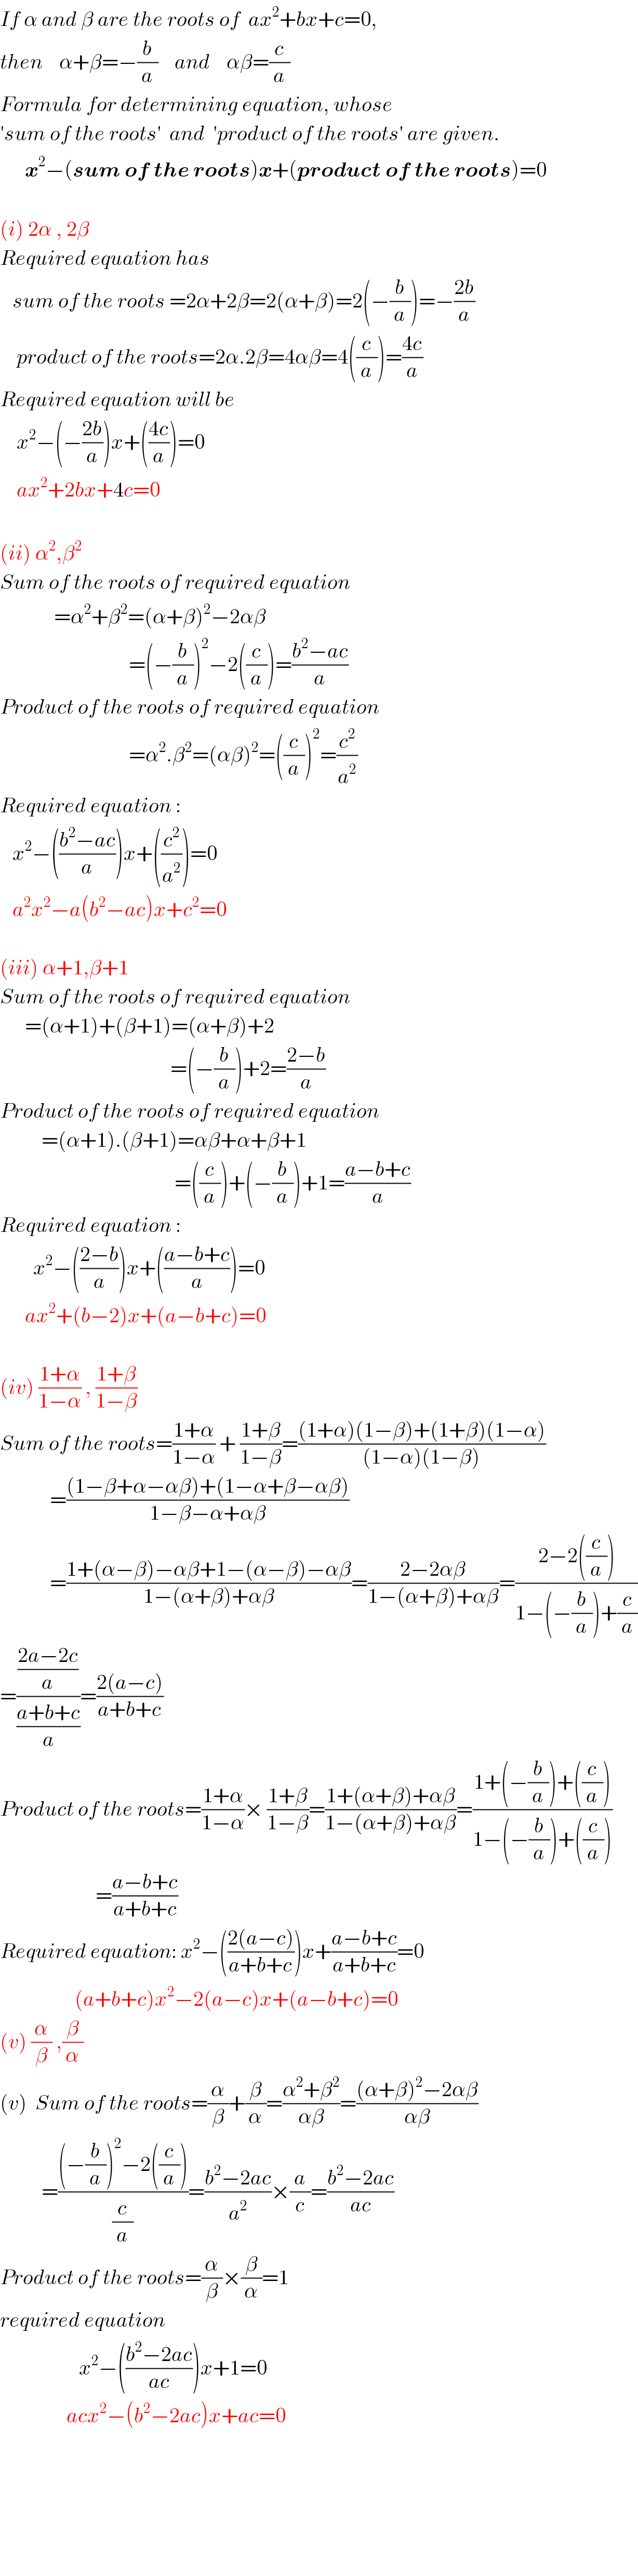 If α and β are the roots of  ax^2 +bx+c=0,  then    α+β=−(b/a)    and    αβ=(c/a)  Formula for determining equation, whose  ′sum of the roots′  and  ′product of the roots′ are given.        x^2 −(sum of the roots)x+(product of the roots)=0    (i) 2α , 2β  Required equation has     sum of the roots =2α+2β=2(α+β)=2(−(b/a))=−((2b)/a)      product of the roots=2α.2β=4αβ=4((c/a))=((4c)/a)  Required equation will be      x^2 −(−((2b)/a))x+(((4c)/a))=0      ax^2 +2bx+4c=0    (ii) α^2 ,β^2   Sum of the roots of required equation               =α^2 +β^2 =(α+β)^2 −2αβ                                 =(−(b/a))^2 −2((c/a))=((b^2 −ac)/a)  Product of the roots of required equation                                 =α^2 .β^2 =(αβ)^2 =((c/a))^2 =(c^2 /a^2 )  Required equation :     x^2 −(((b^2 −ac)/a))x+((c^2 /a^2 ))=0     a^2 x^2 −a(b^2 −ac)x+c^2 =0    (iii) α+1,β+1  Sum of the roots of required equation        =(α+1)+(β+1)=(α+β)+2                                           =(−(b/a))+2=((2−b)/a)  Product of the roots of required equation            =(α+1).(β+1)=αβ+α+β+1                                            =((c/a))+(−(b/a))+1=((a−b+c)/a)  Required equation :          x^2 −(((2−b)/a))x+(((a−b+c)/a))=0        ax^2 +(b−2)x+(a−b+c)=0    (iv) ((1+α)/(1−α)) , ((1+β)/(1−β))  Sum of the roots=((1+α)/(1−α)) + ((1+β)/(1−β))=(((1+α)(1−β)+(1+β)(1−α))/((1−α)(1−β)))              =(((1−β+α−αβ)+(1−α+β−αβ))/(1−β−α+αβ))              =((1+(α−β)−αβ+1−(α−β)−αβ)/(1−(α+β)+αβ))=((2−2αβ)/(1−(α+β)+αβ))=((2−2((c/a)))/(1−(−(b/a))+(c/a)))  =(((2a−2c)/a)/((a+b+c)/a))=((2(a−c))/(a+b+c))  Product of the roots=((1+α)/(1−α))× ((1+β)/(1−β))=((1+(α+β)+αβ)/(1−(α+β)+αβ))=((1+(−(b/a))+((c/a)))/(1−(−(b/a))+((c/a))))                         =((a−b+c)/(a+b+c))  Required equation: x^2 −(((2(a−c))/(a+b+c)))x+((a−b+c)/(a+b+c))=0                    (a+b+c)x^2 −2(a−c)x+(a−b+c)=0  (v) (α/β) ,(β/α)  (v)  Sum of the roots=(α/β)+(β/α)=((α^2 +β^2 )/(αβ))=(((α+β)^2 −2αβ)/(αβ))            =(((−(b/a))^2 −2((c/a)))/(c/a))=((b^2 −2ac)/a^2 )×(a/c)=((b^2 −2ac)/(ac))  Product of the roots=(α/β)×(β/α)=1  required equation                      x^2 −(((b^2 −2ac)/(ac)))x+1=0                  acx^2 −(b^2 −2ac)x+ac=0            